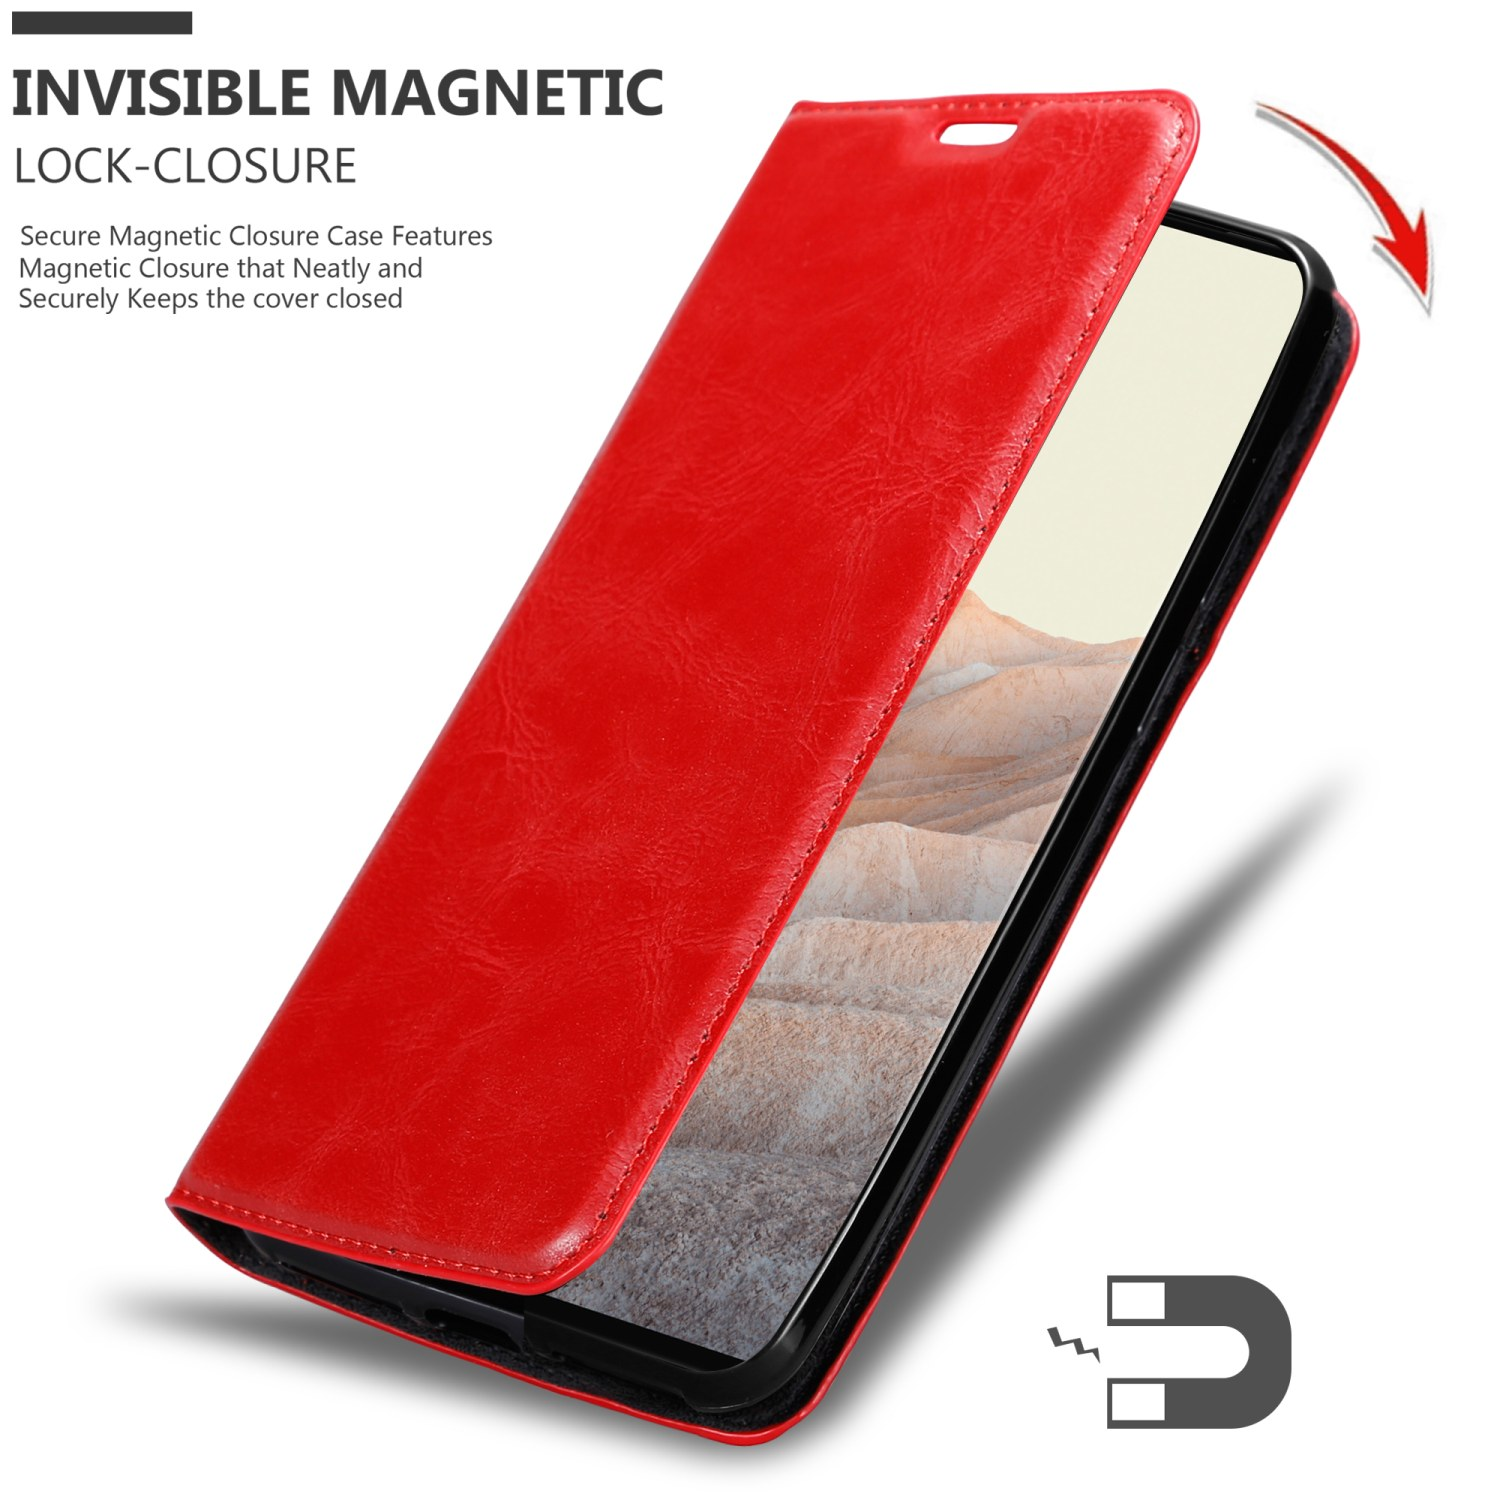 Hülle Invisible PIXEL Magnet, ROT 6 Book PRO, Google, Bookcover, APFEL CADORABO